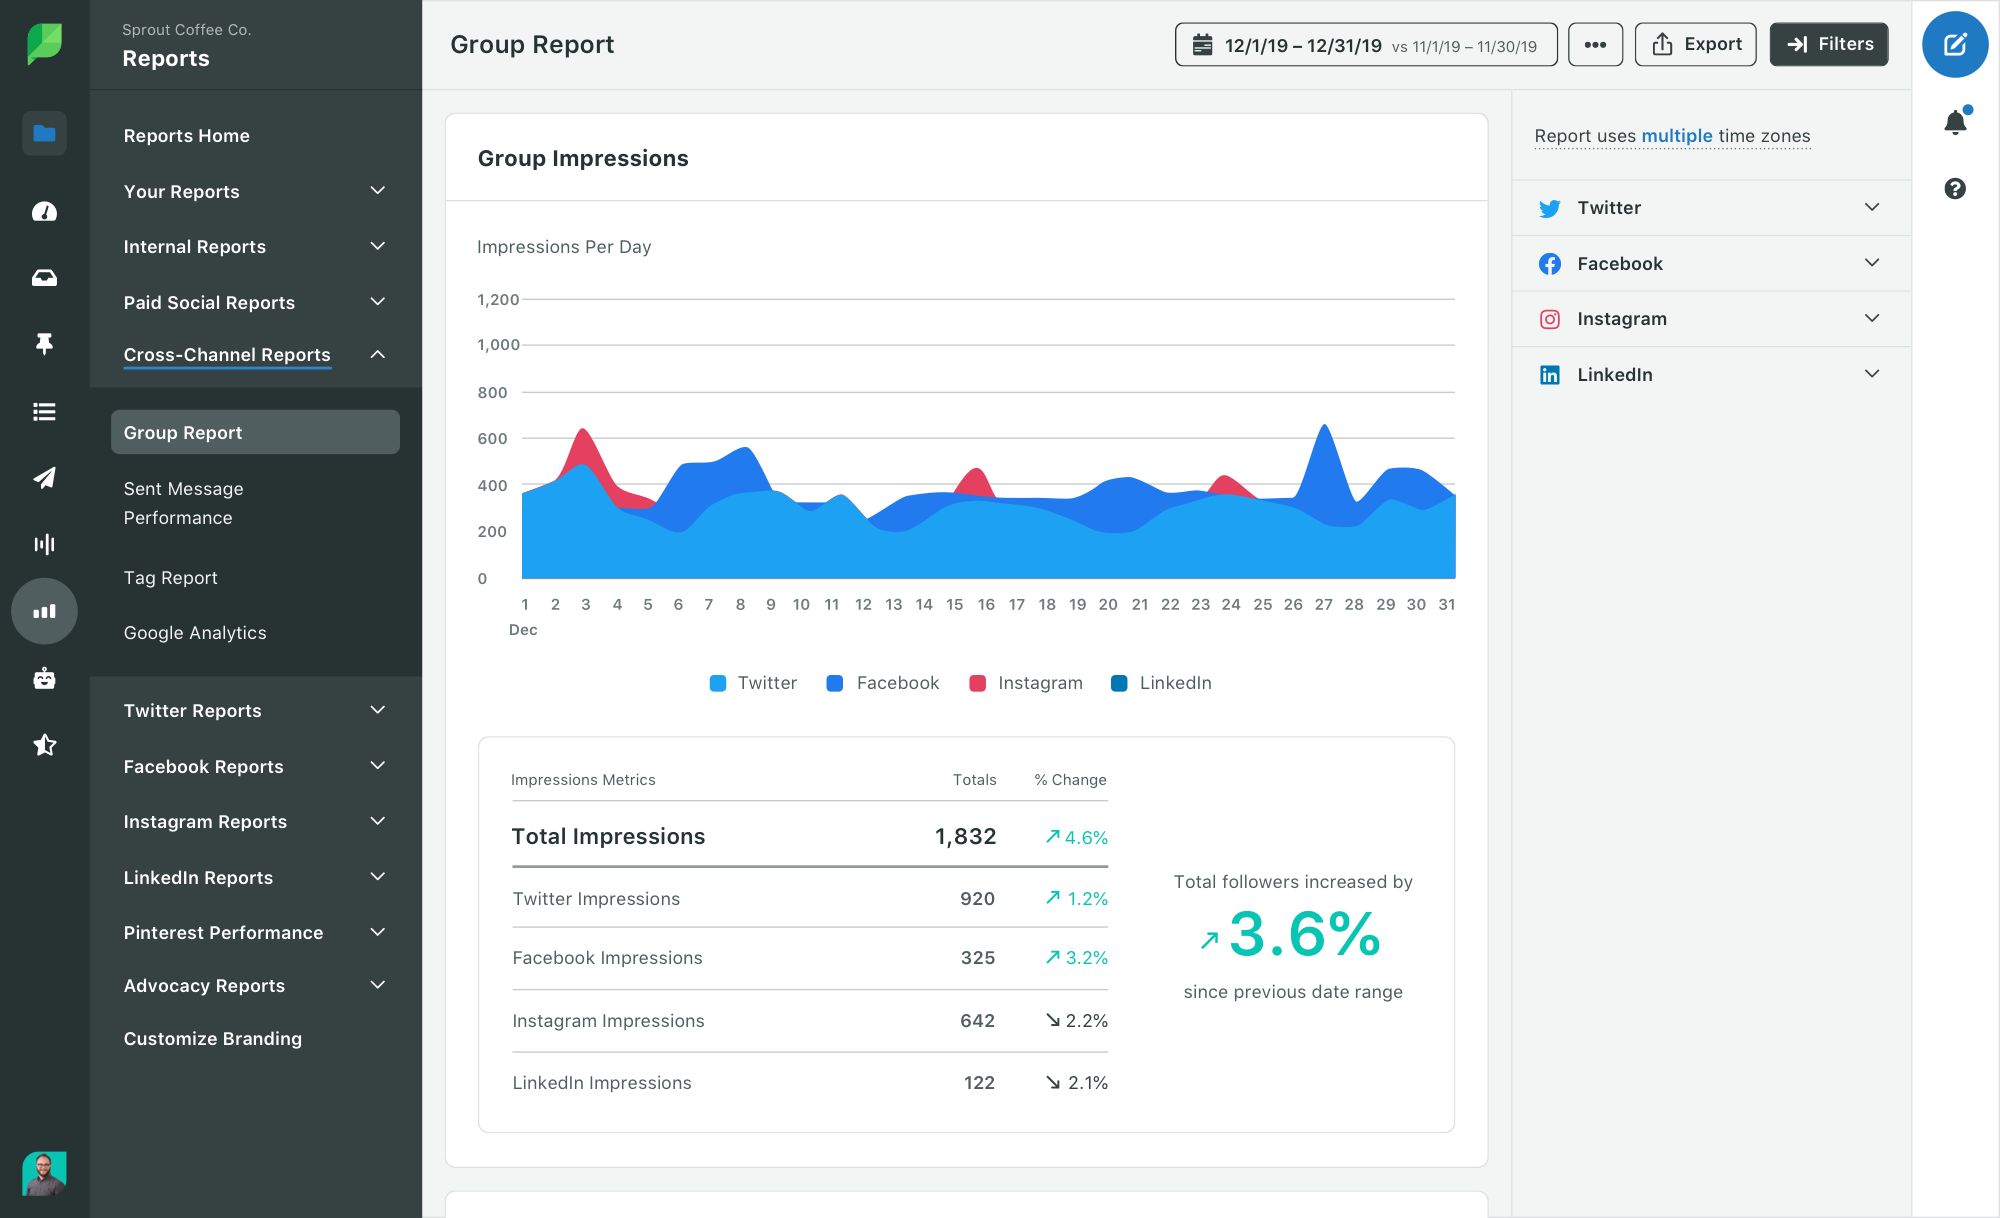 Sprout Social Product Image of Analytics Cross-Channel Group Report Impressions